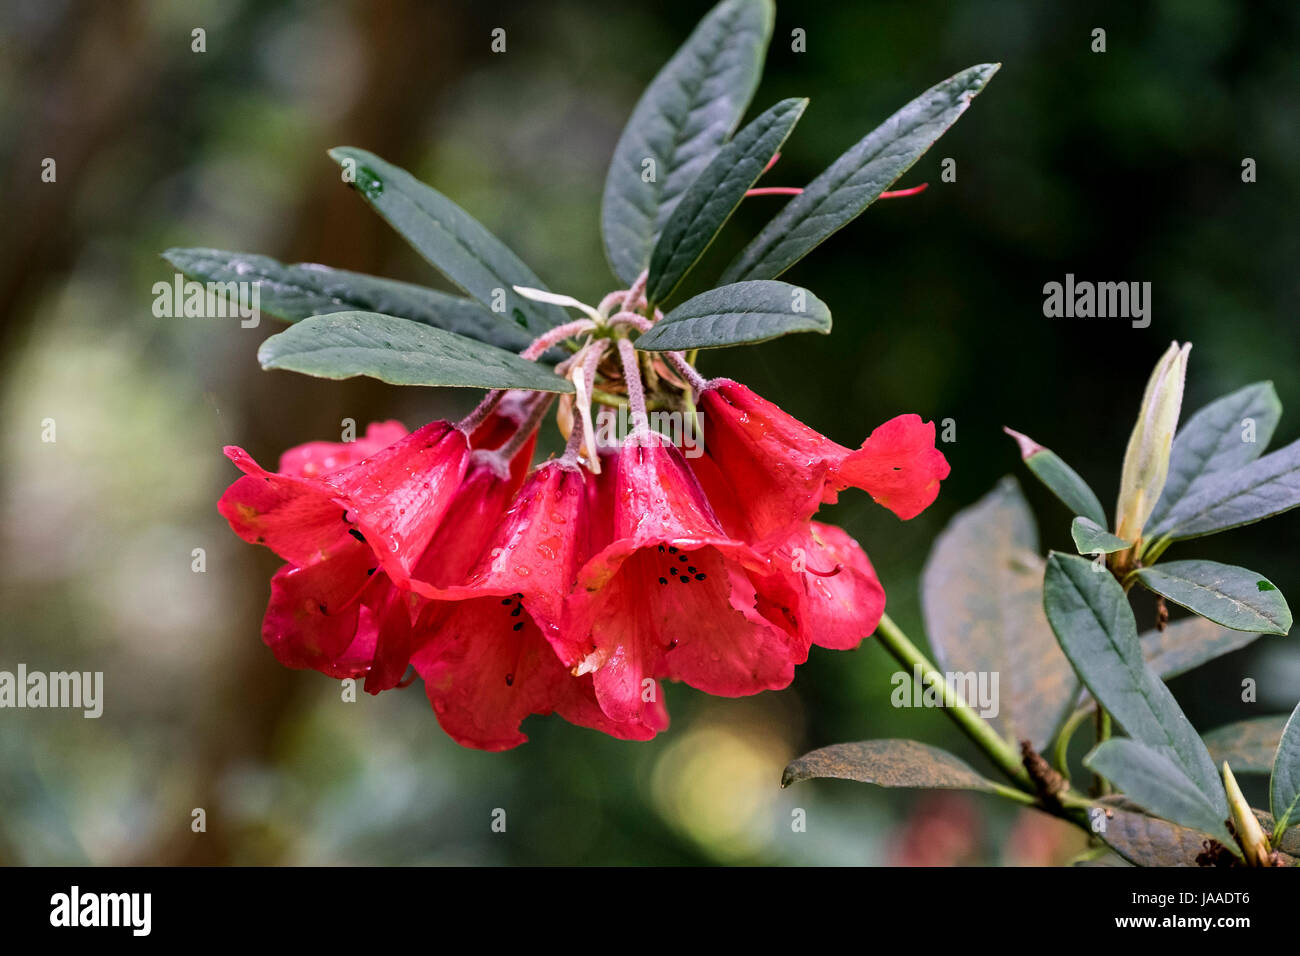 A closeup view of the flowers of a Rhododendron elegantum Elizabeth plant. Stock Photo